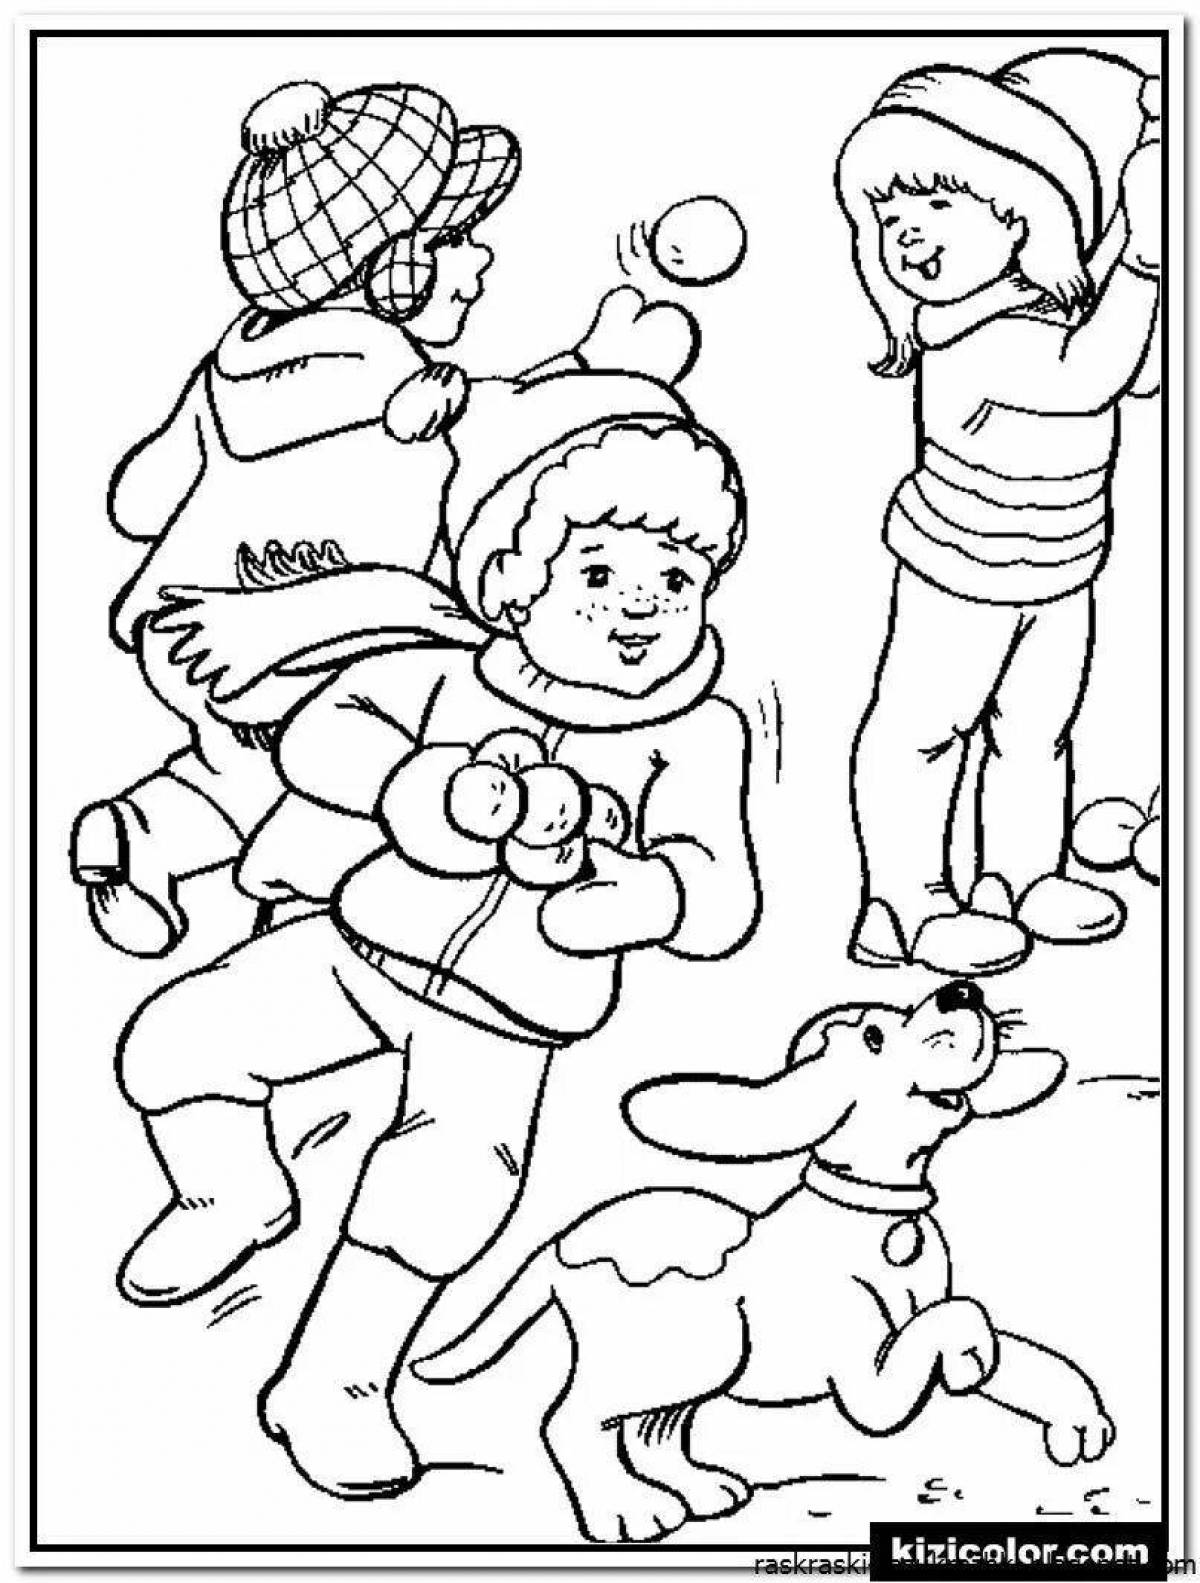 Great coloring book for kids in winter